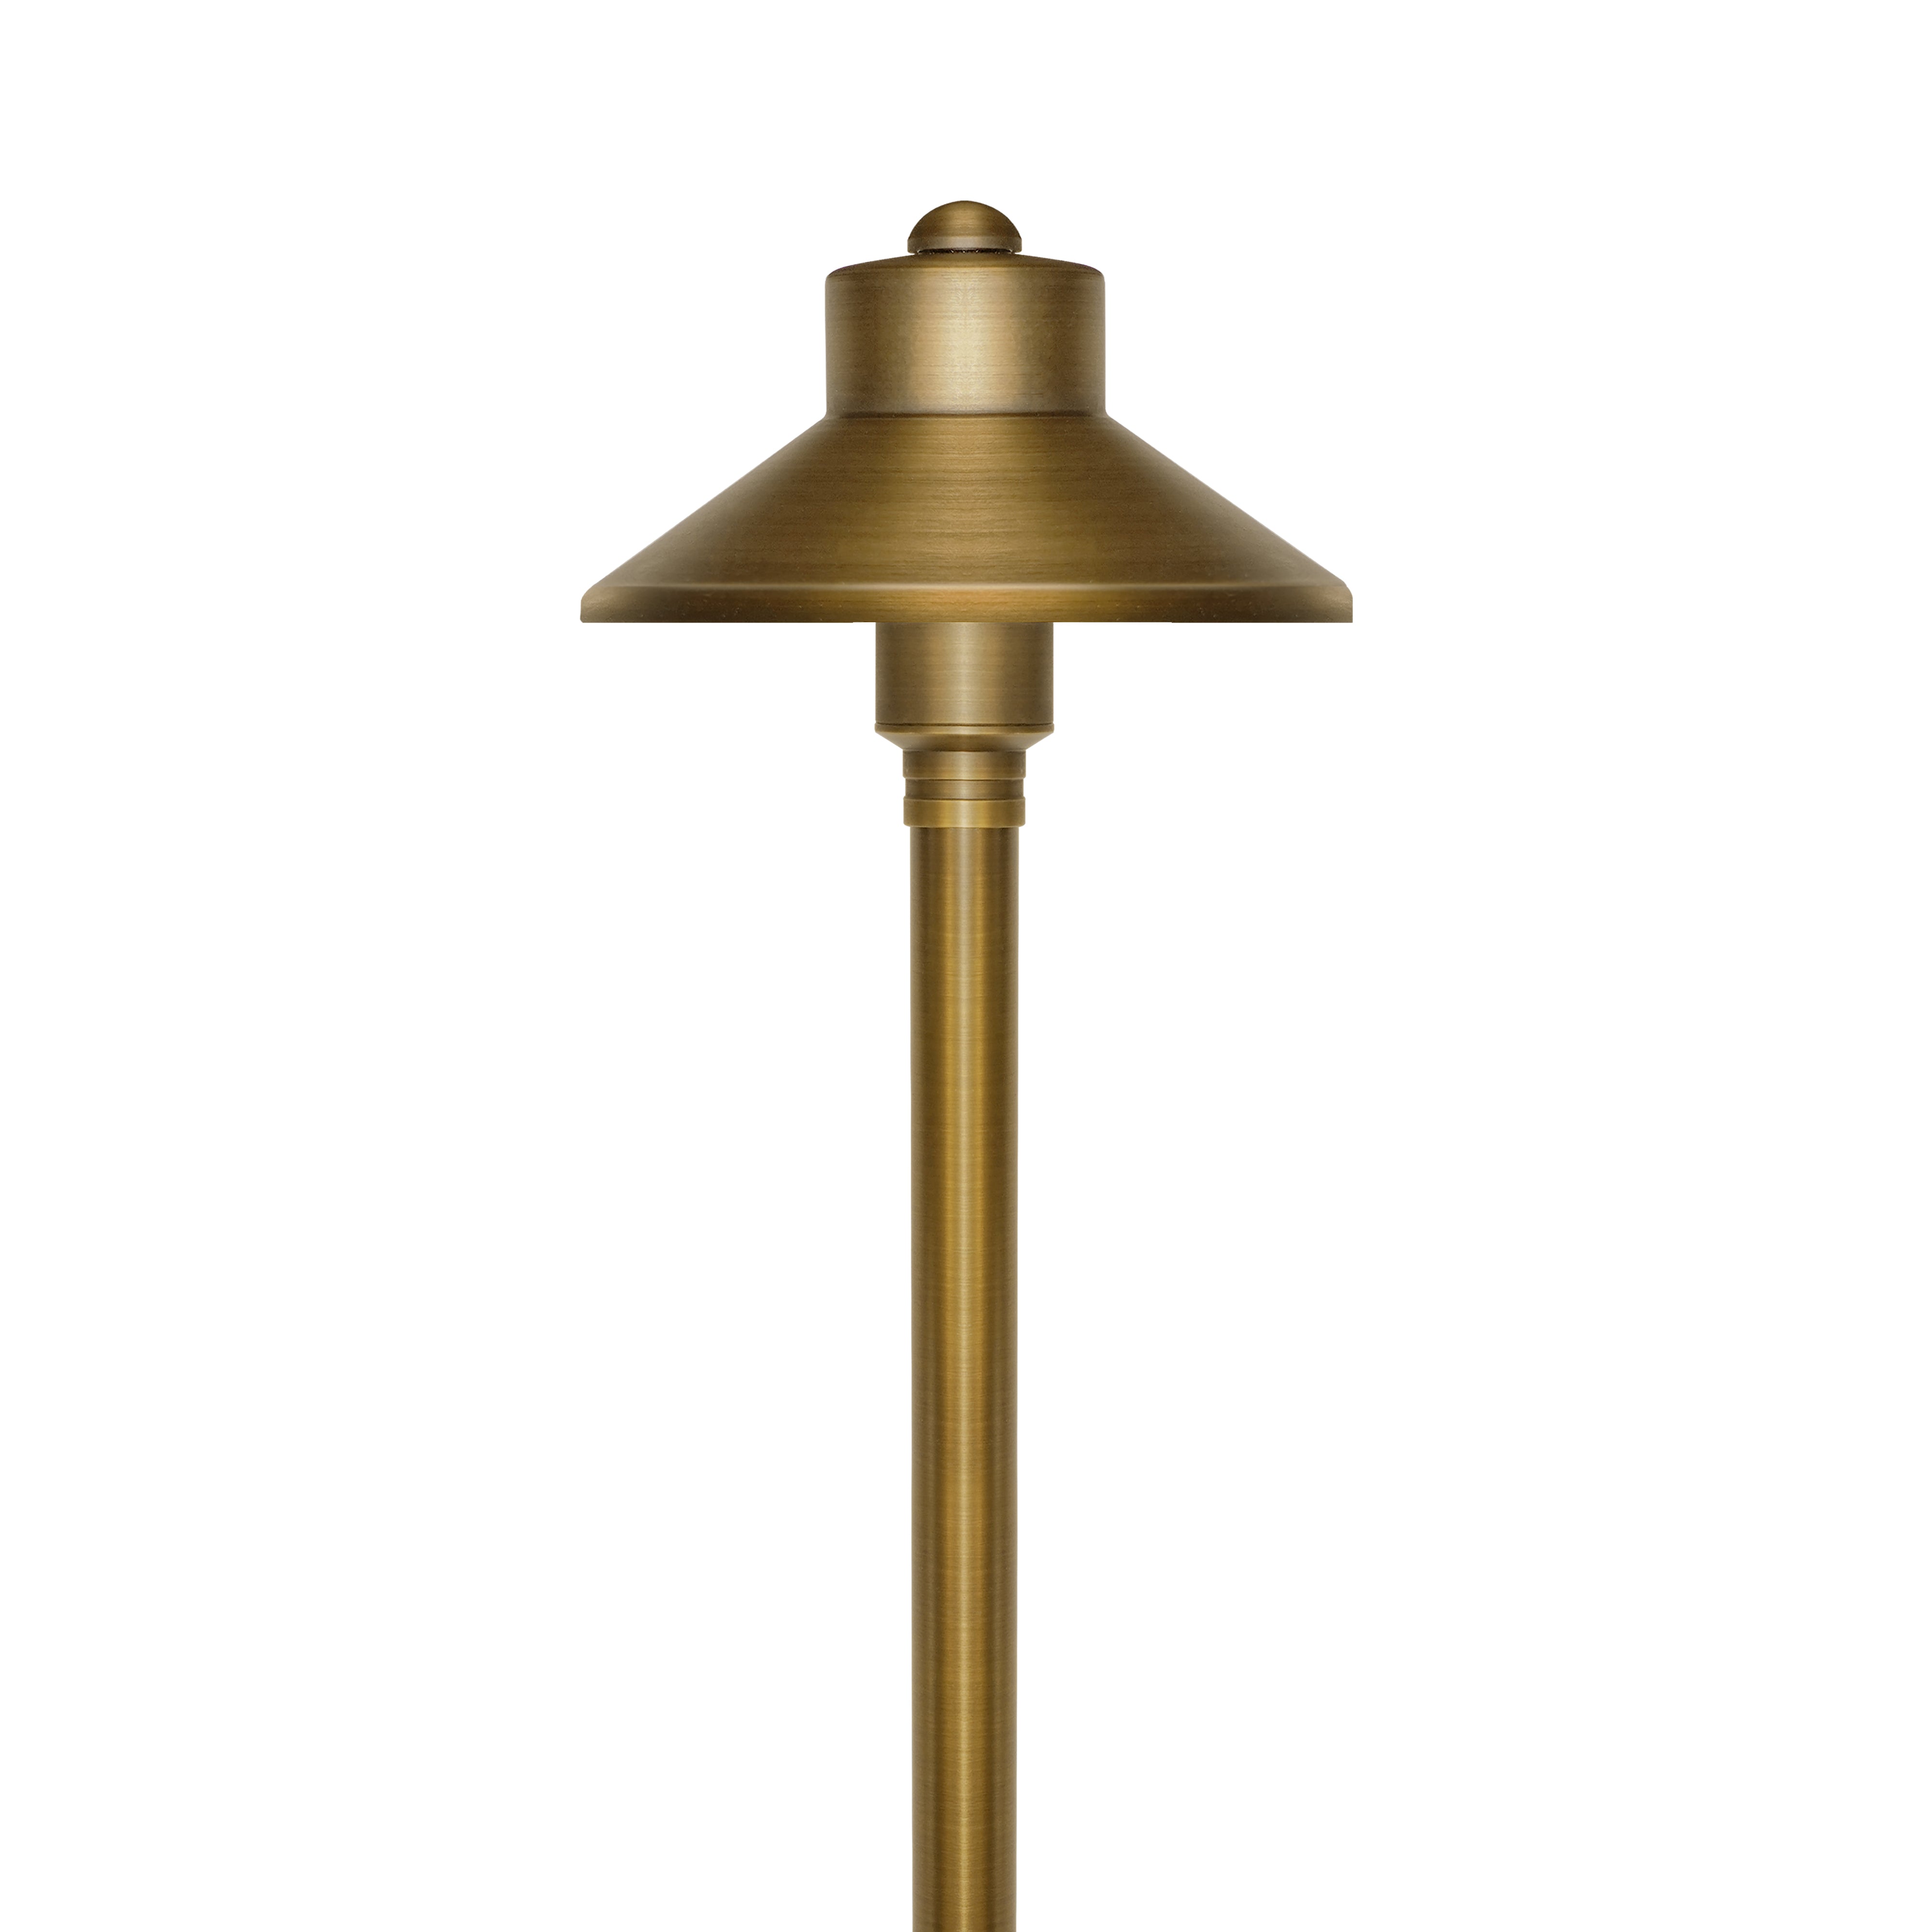 Low Voltage Solid Brass China Hat Path Light (5" Shade, 20" Tall), 3W, 12V AC/DC, IP65 Waterproof, 2700K